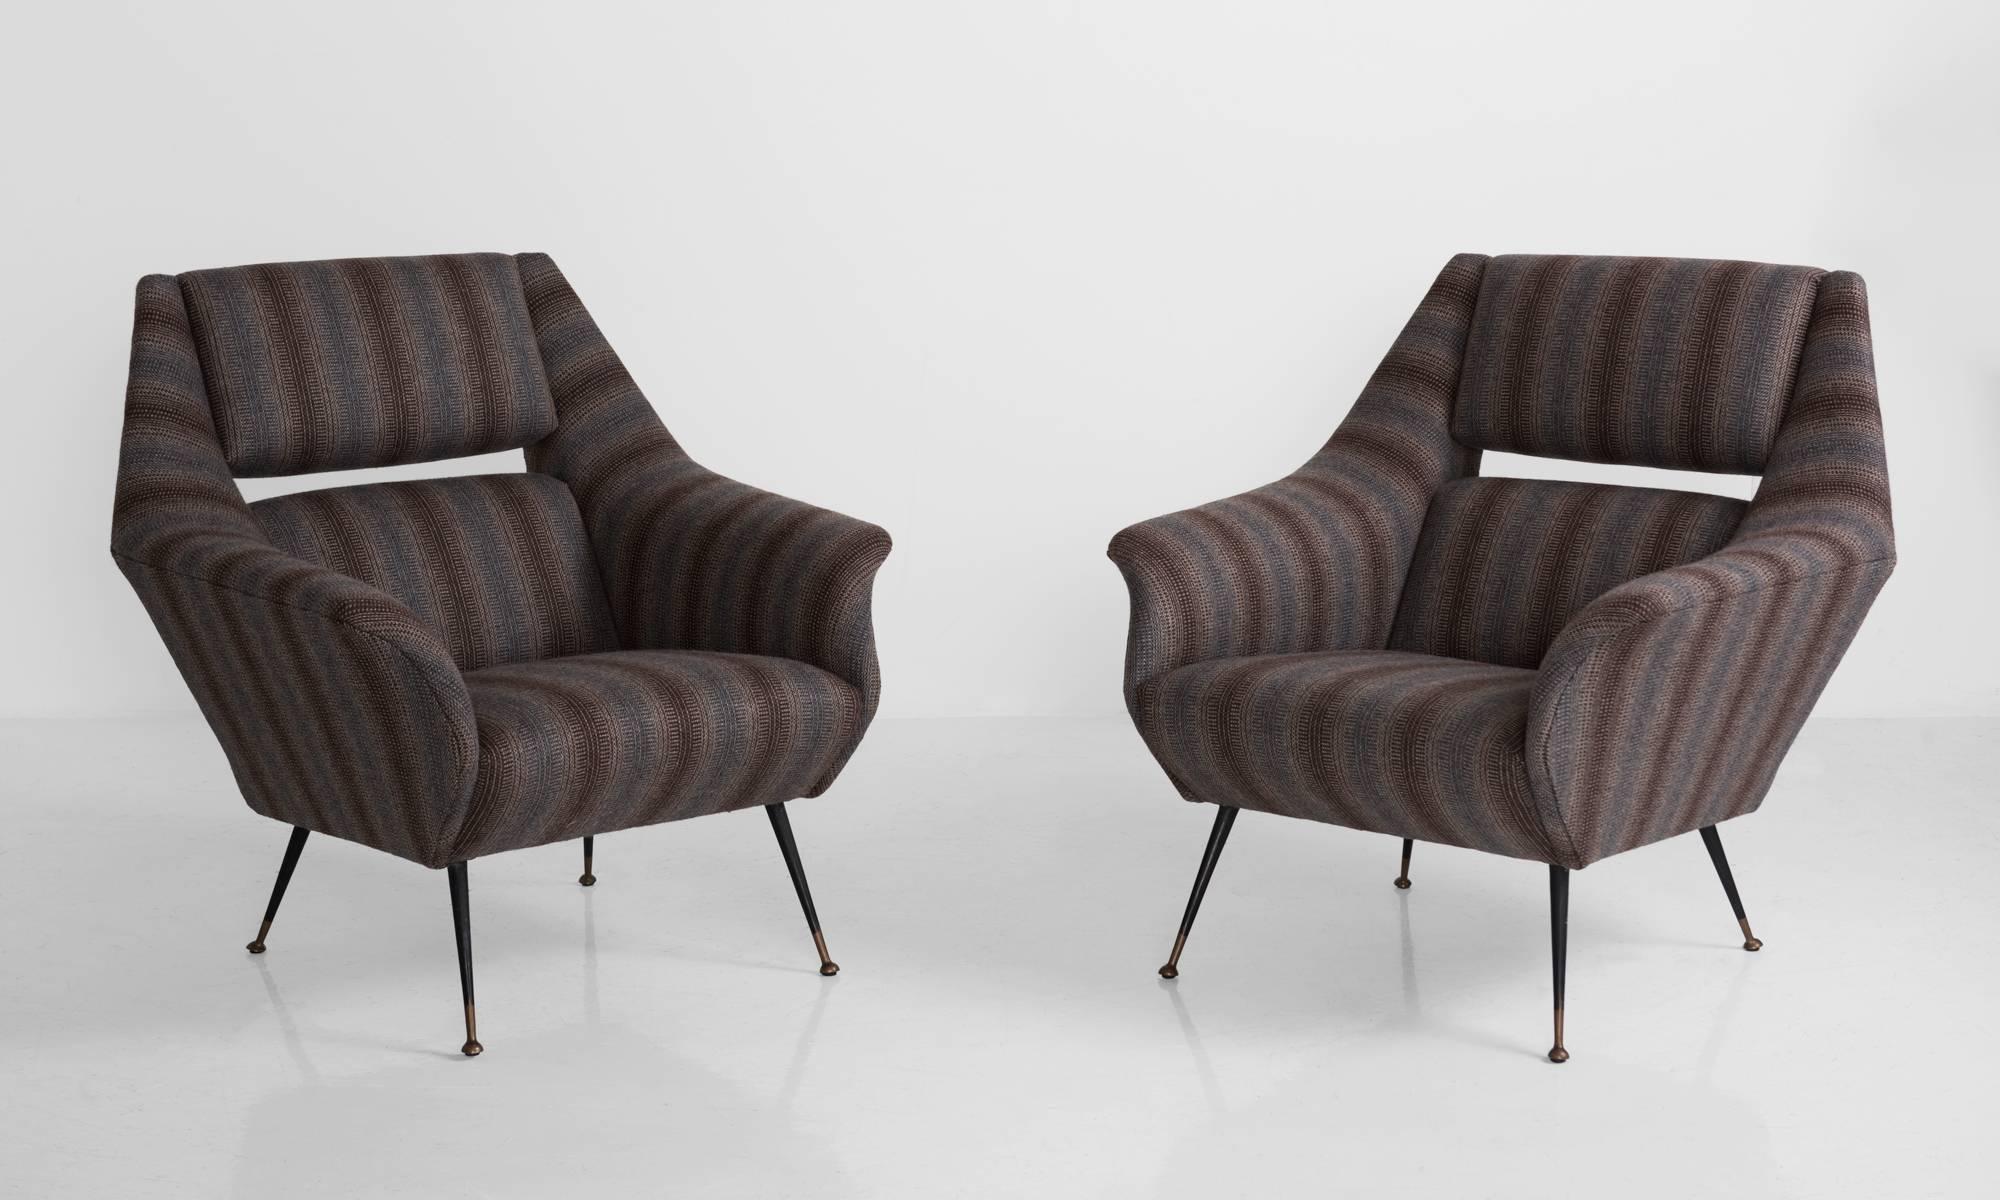 Italian open back armchairs, newly reupholstered in striped wool Maharam fabric.

Made in Italy, circa 1960.